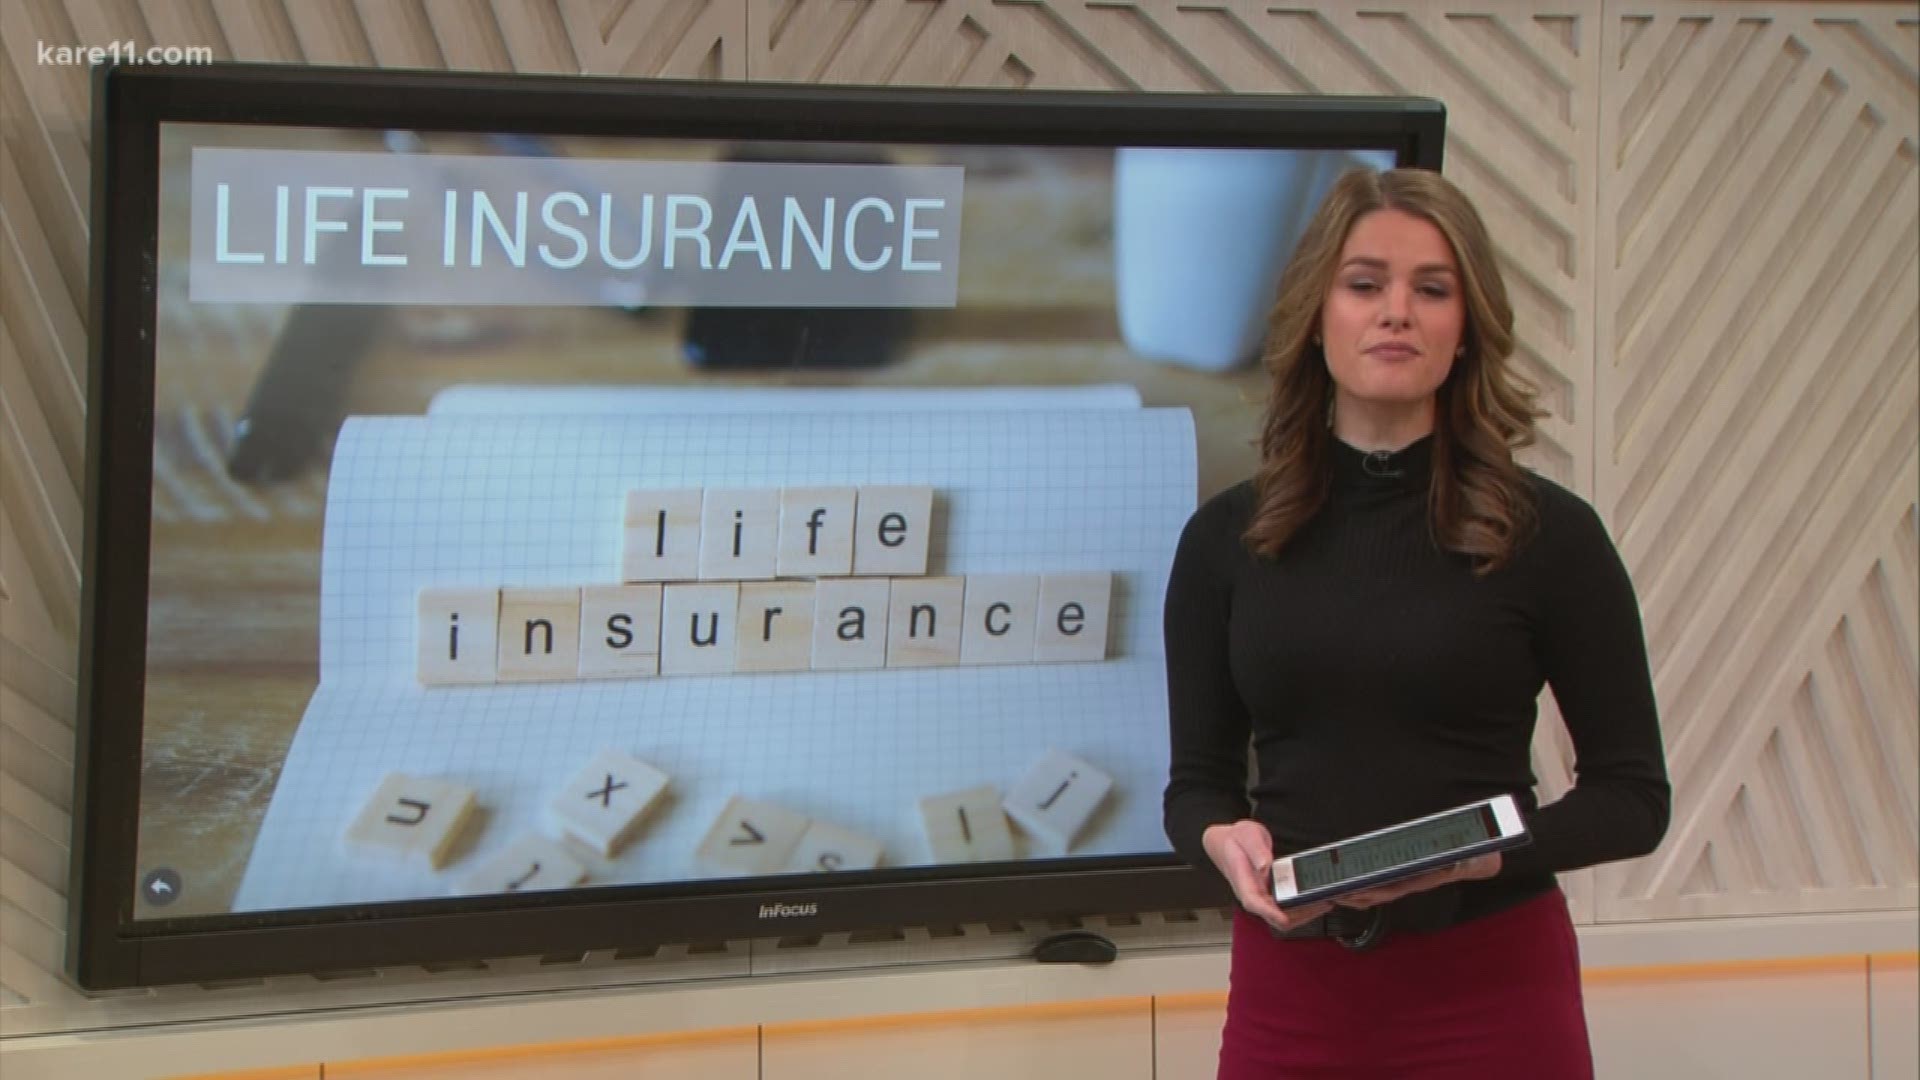 Alicia Lewis is talking about life insurance and how it can help you protect your family in the future.